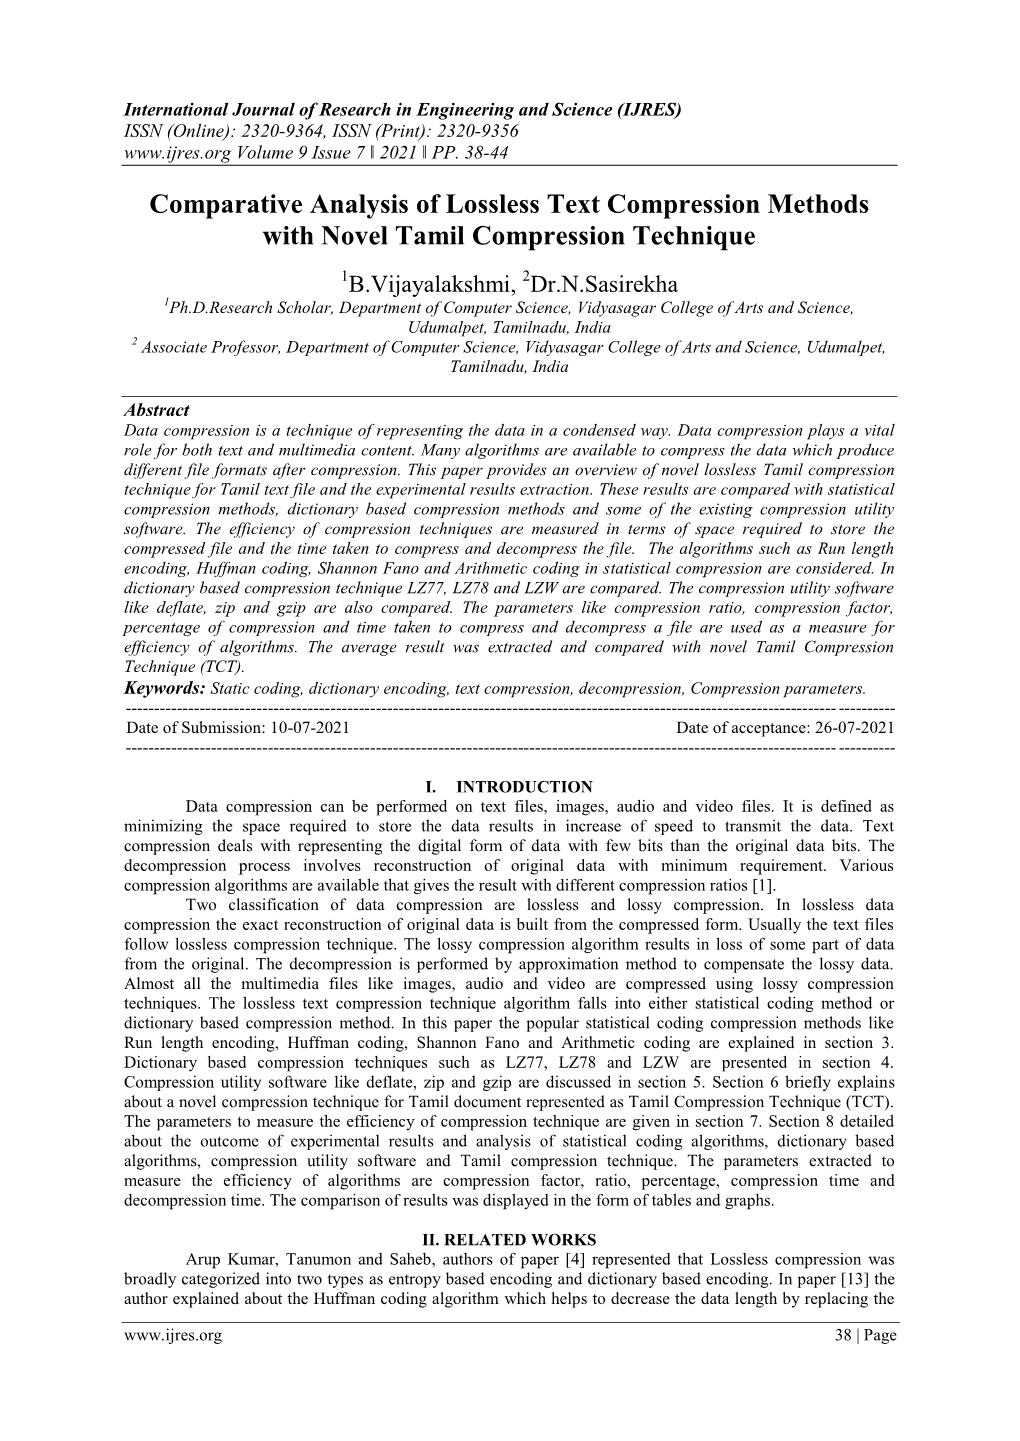 Comparative Analysis of Lossless Text Compression Methods with Novel Tamil Compression Technique